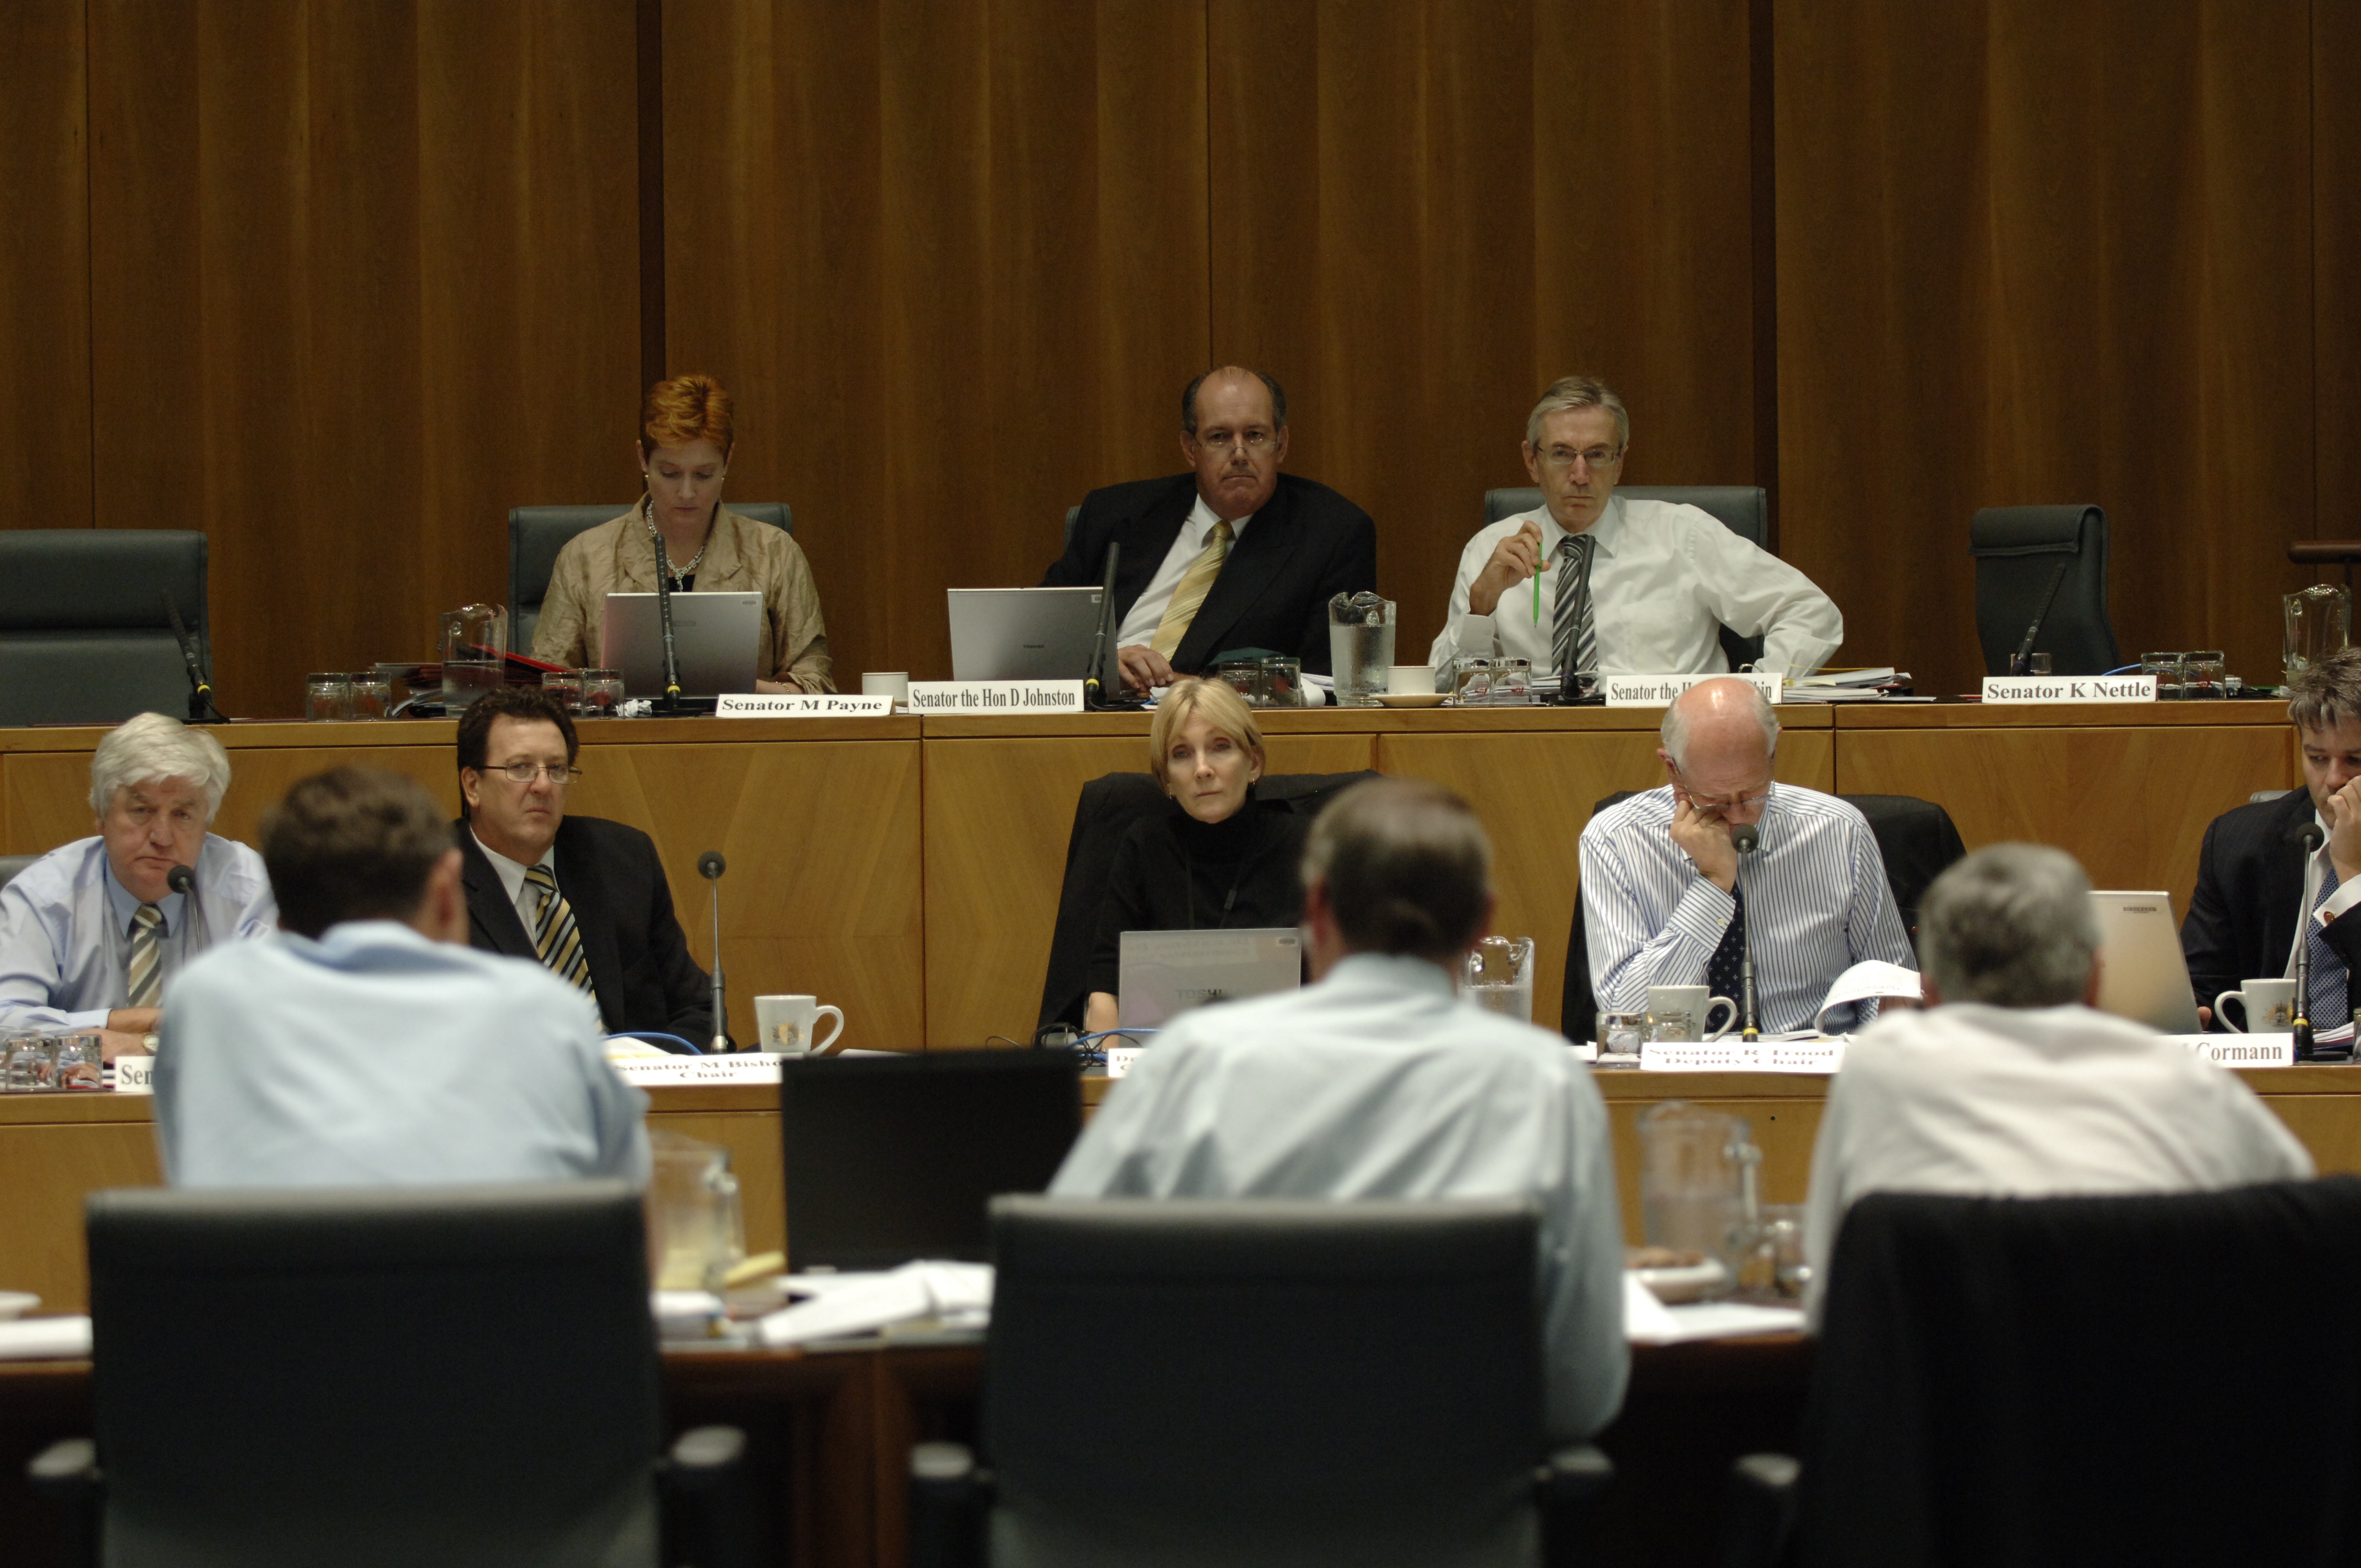 Standing Committee on Foreign Affairs, Defence and Trade at an additional estimates hearing, 20 February 2008. Top row facing camera L-R: Senators Marise Payne, David Johnston and Nick Minchin. Bottom row facing camera L-R: Senators Michael Forshaw and Mark Bishop [Chair], Dr Kathleen Dermody [Secretary], Senators Russell Trood [Deputy Chair] and Mathias Cormann. DPS Auspic.